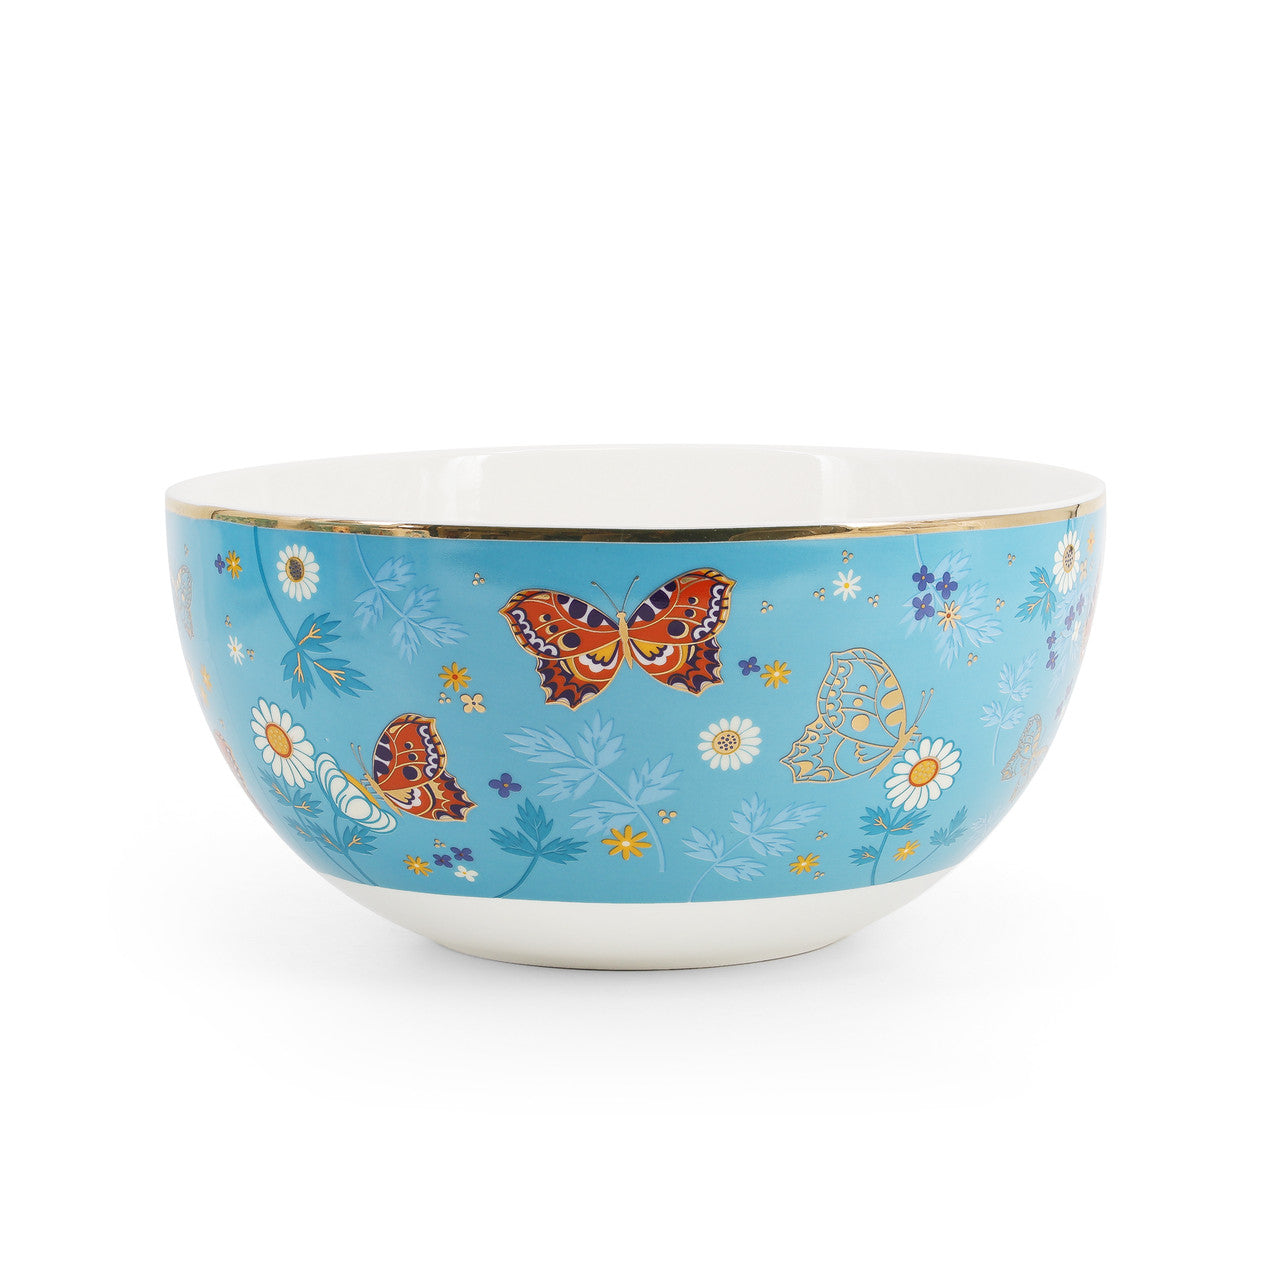 Tipperary Crystal Butterfly Fruit Bowl - NEW 2022  Drawing inspiration from urban garden, the Tipperary Crystal Butterfly collection transforms an icon into something modern and unexpected. Playful and elegant, this collection draws from the inherent beauty of the butterfly.